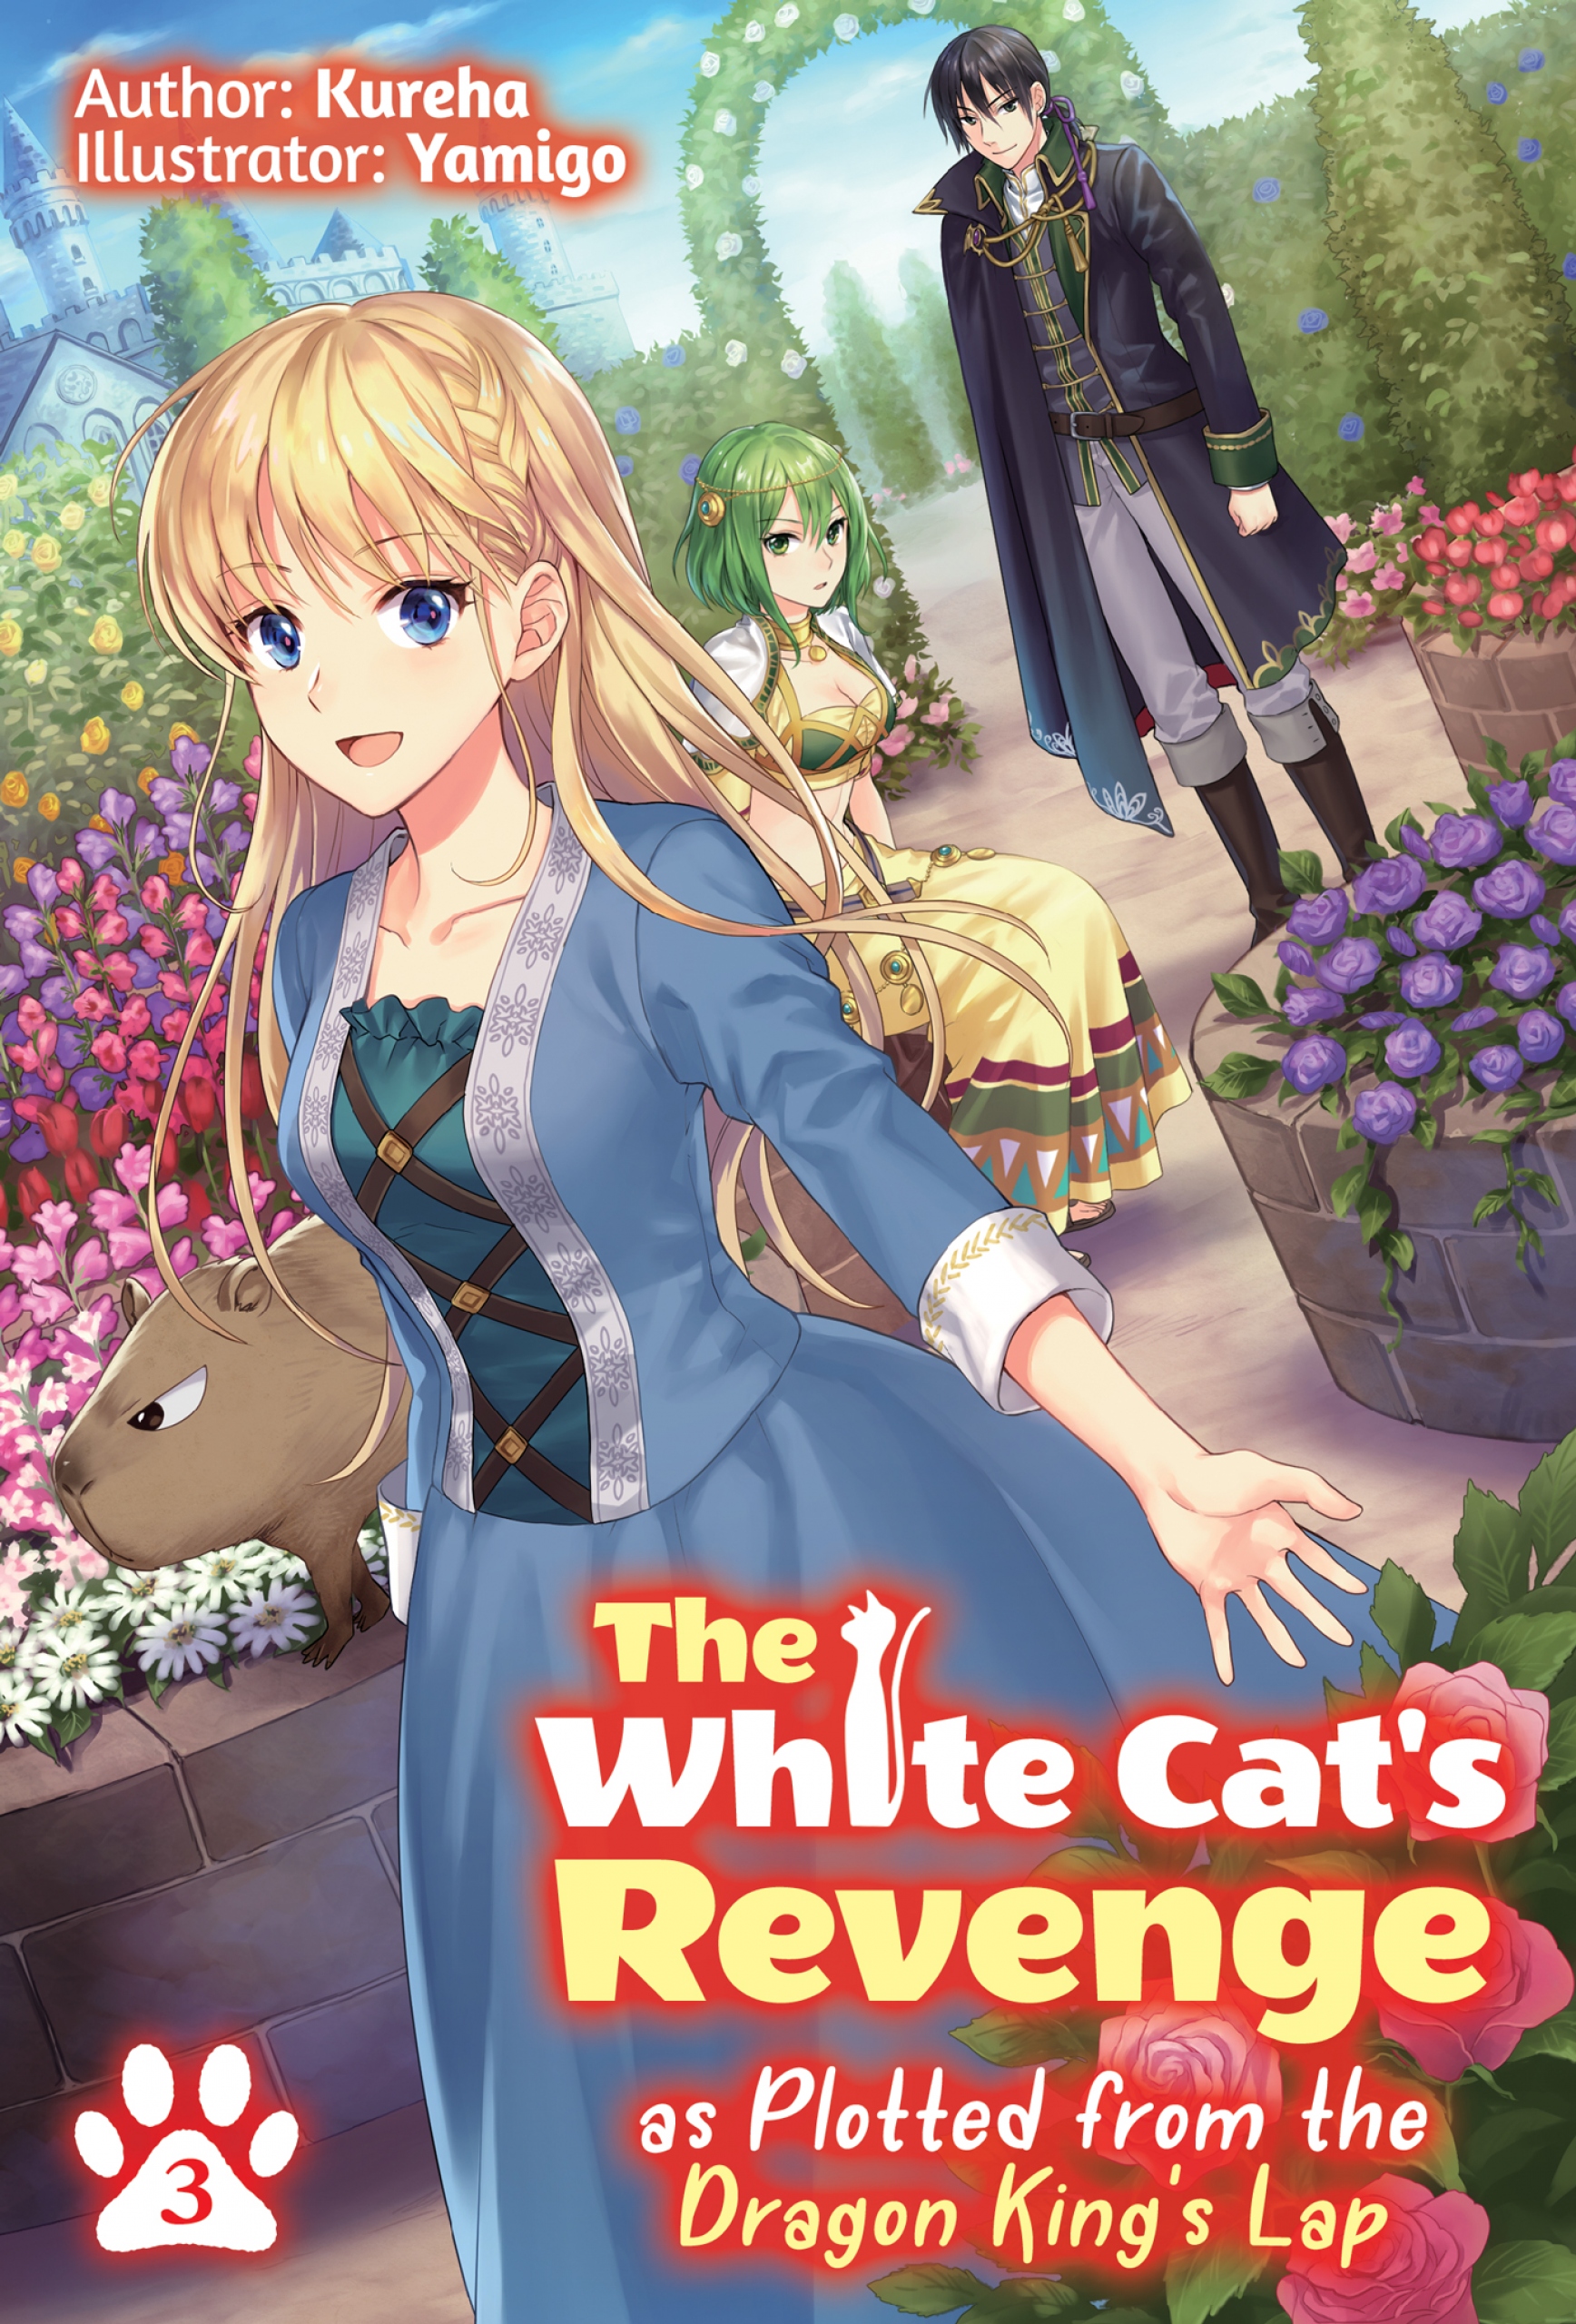 The White Cat"s Revenge as Plotted from the Dragon King"s Lap: Volume 3